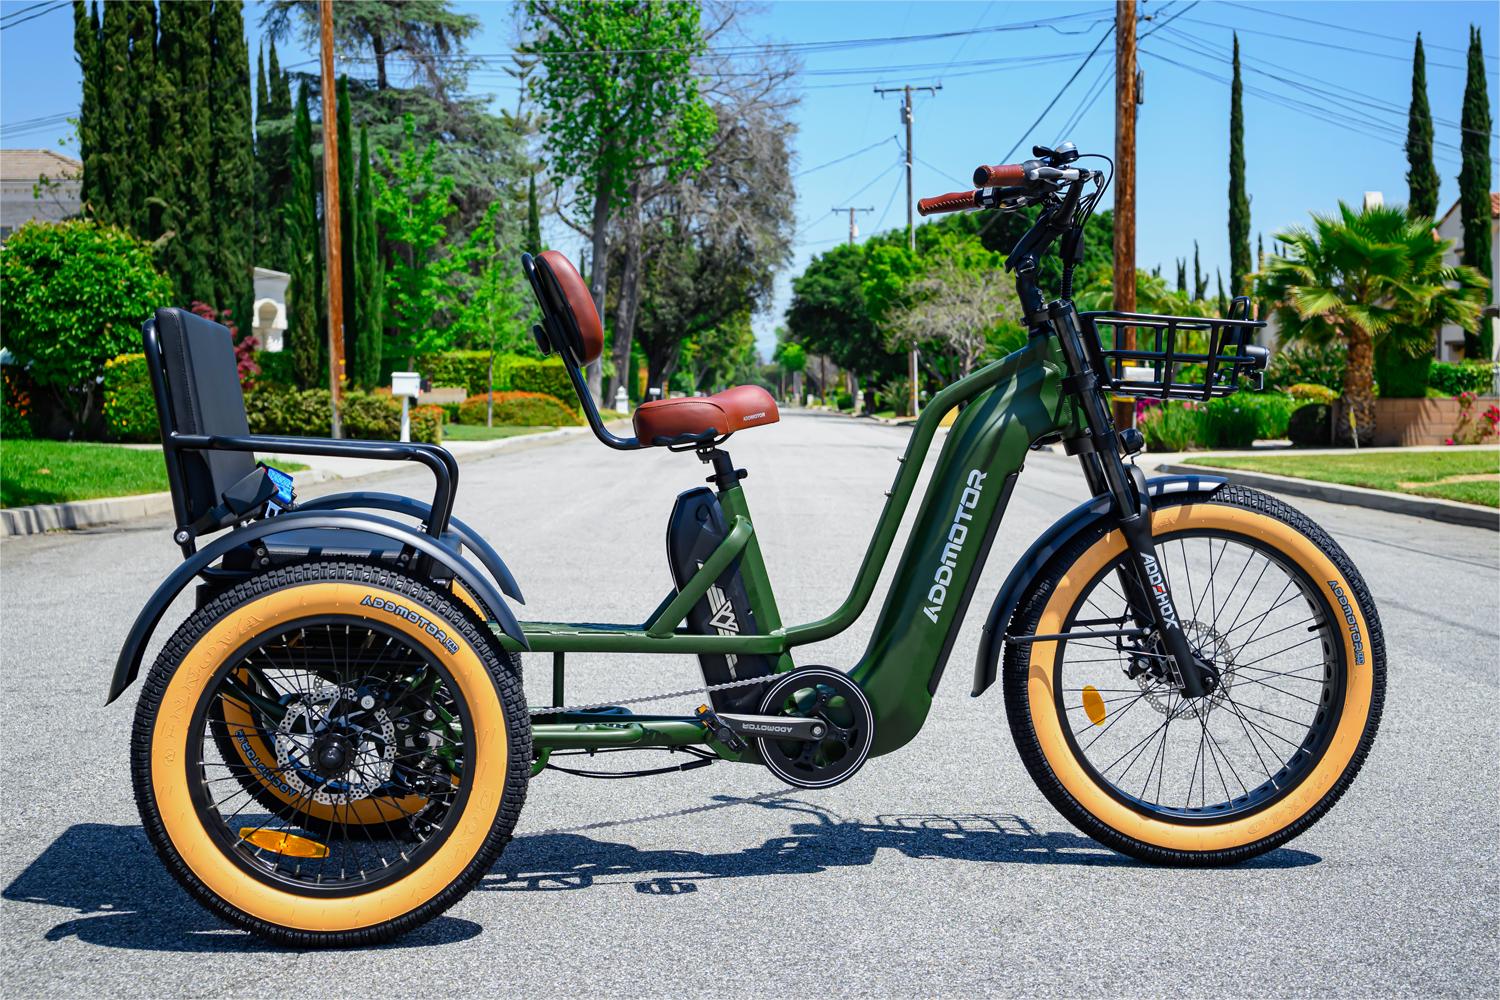 Greattan L electric trike with passenger seat